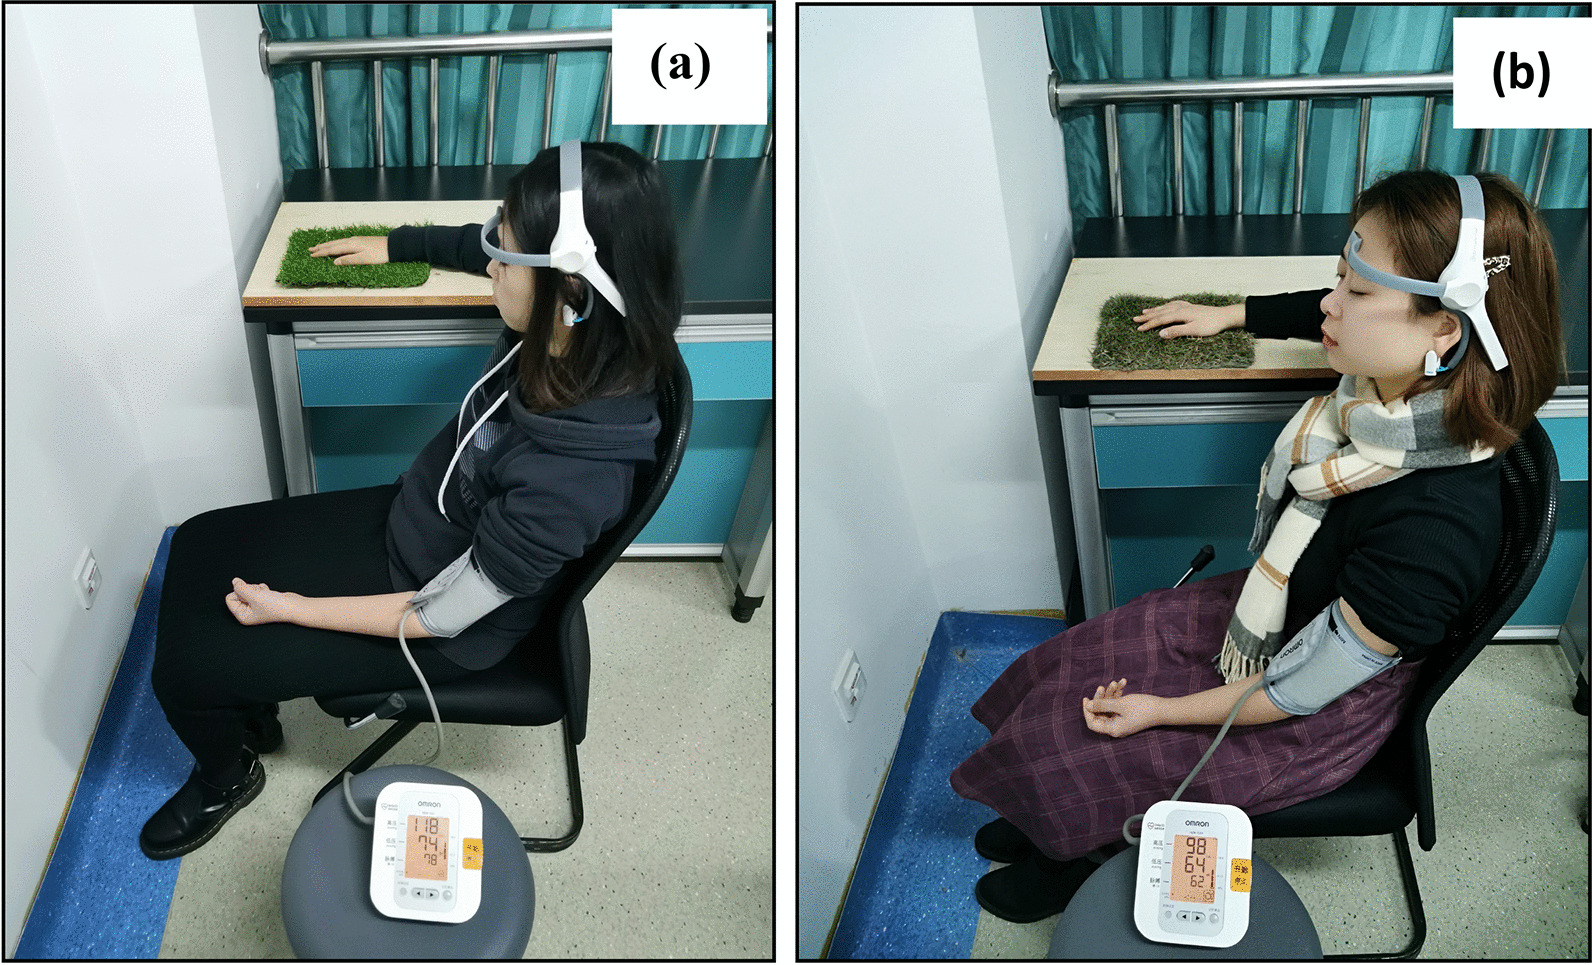 Nature’s therapeutic power: a study on the psychophysiological effects of touching ornamental grass in Chinese women